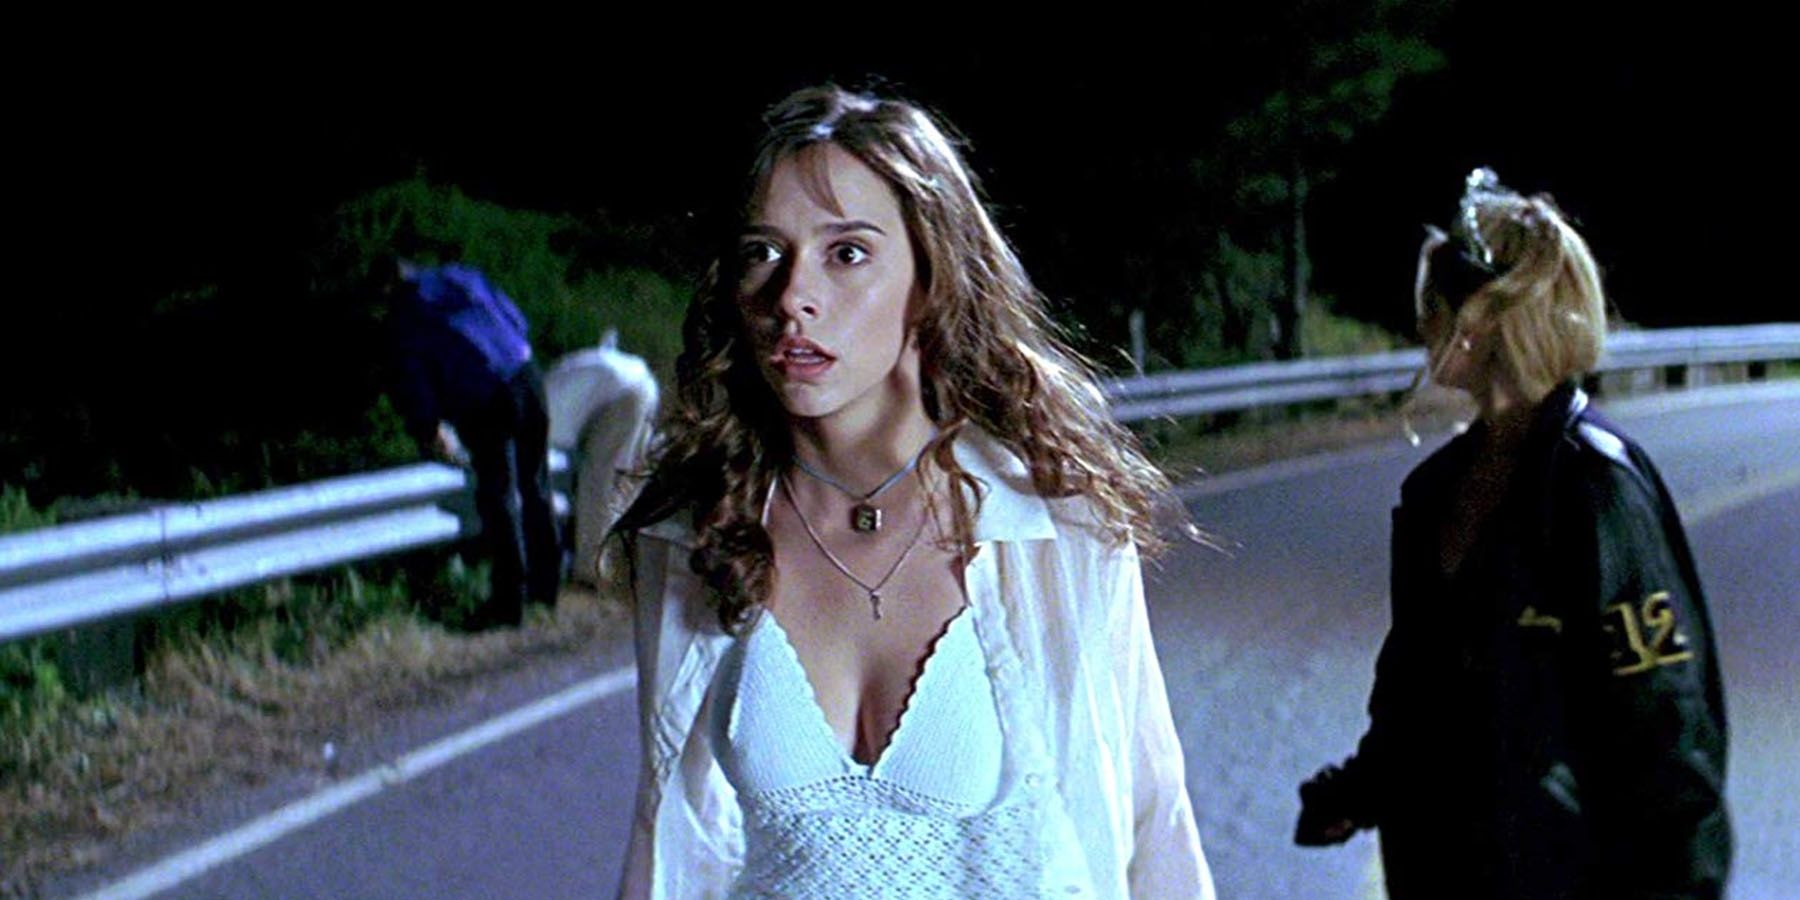 Jennifer Love Hewitt as Julie James from I Know What You Did Last Summer